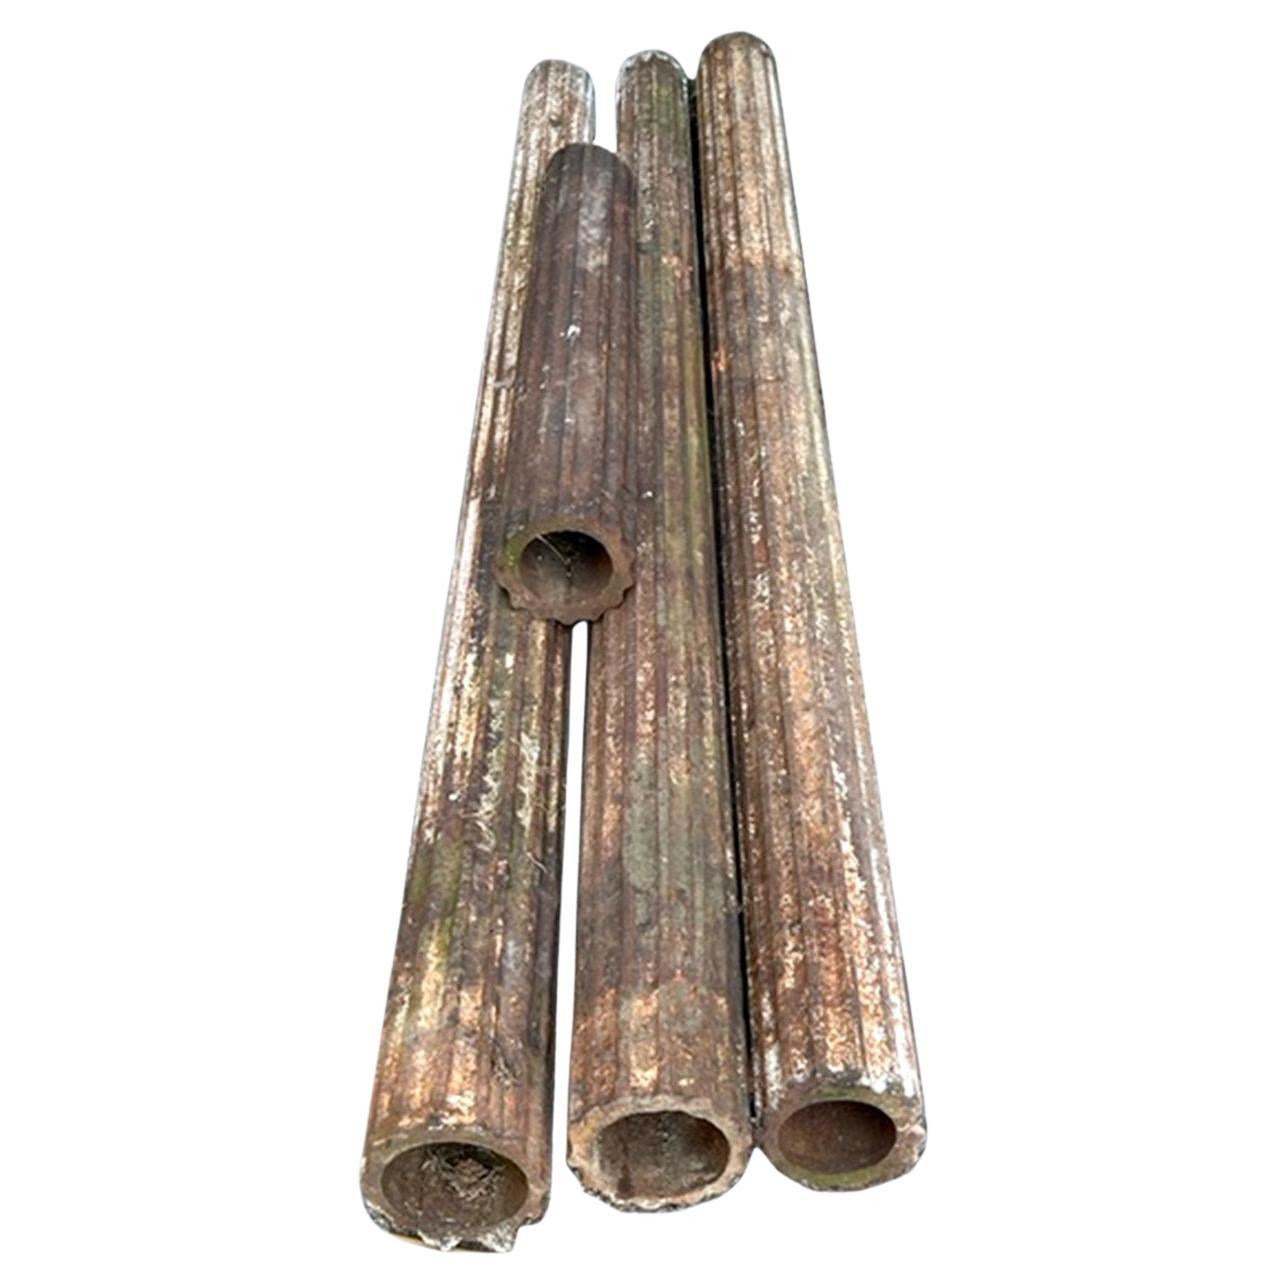 Collection of Fluted Iron Columns